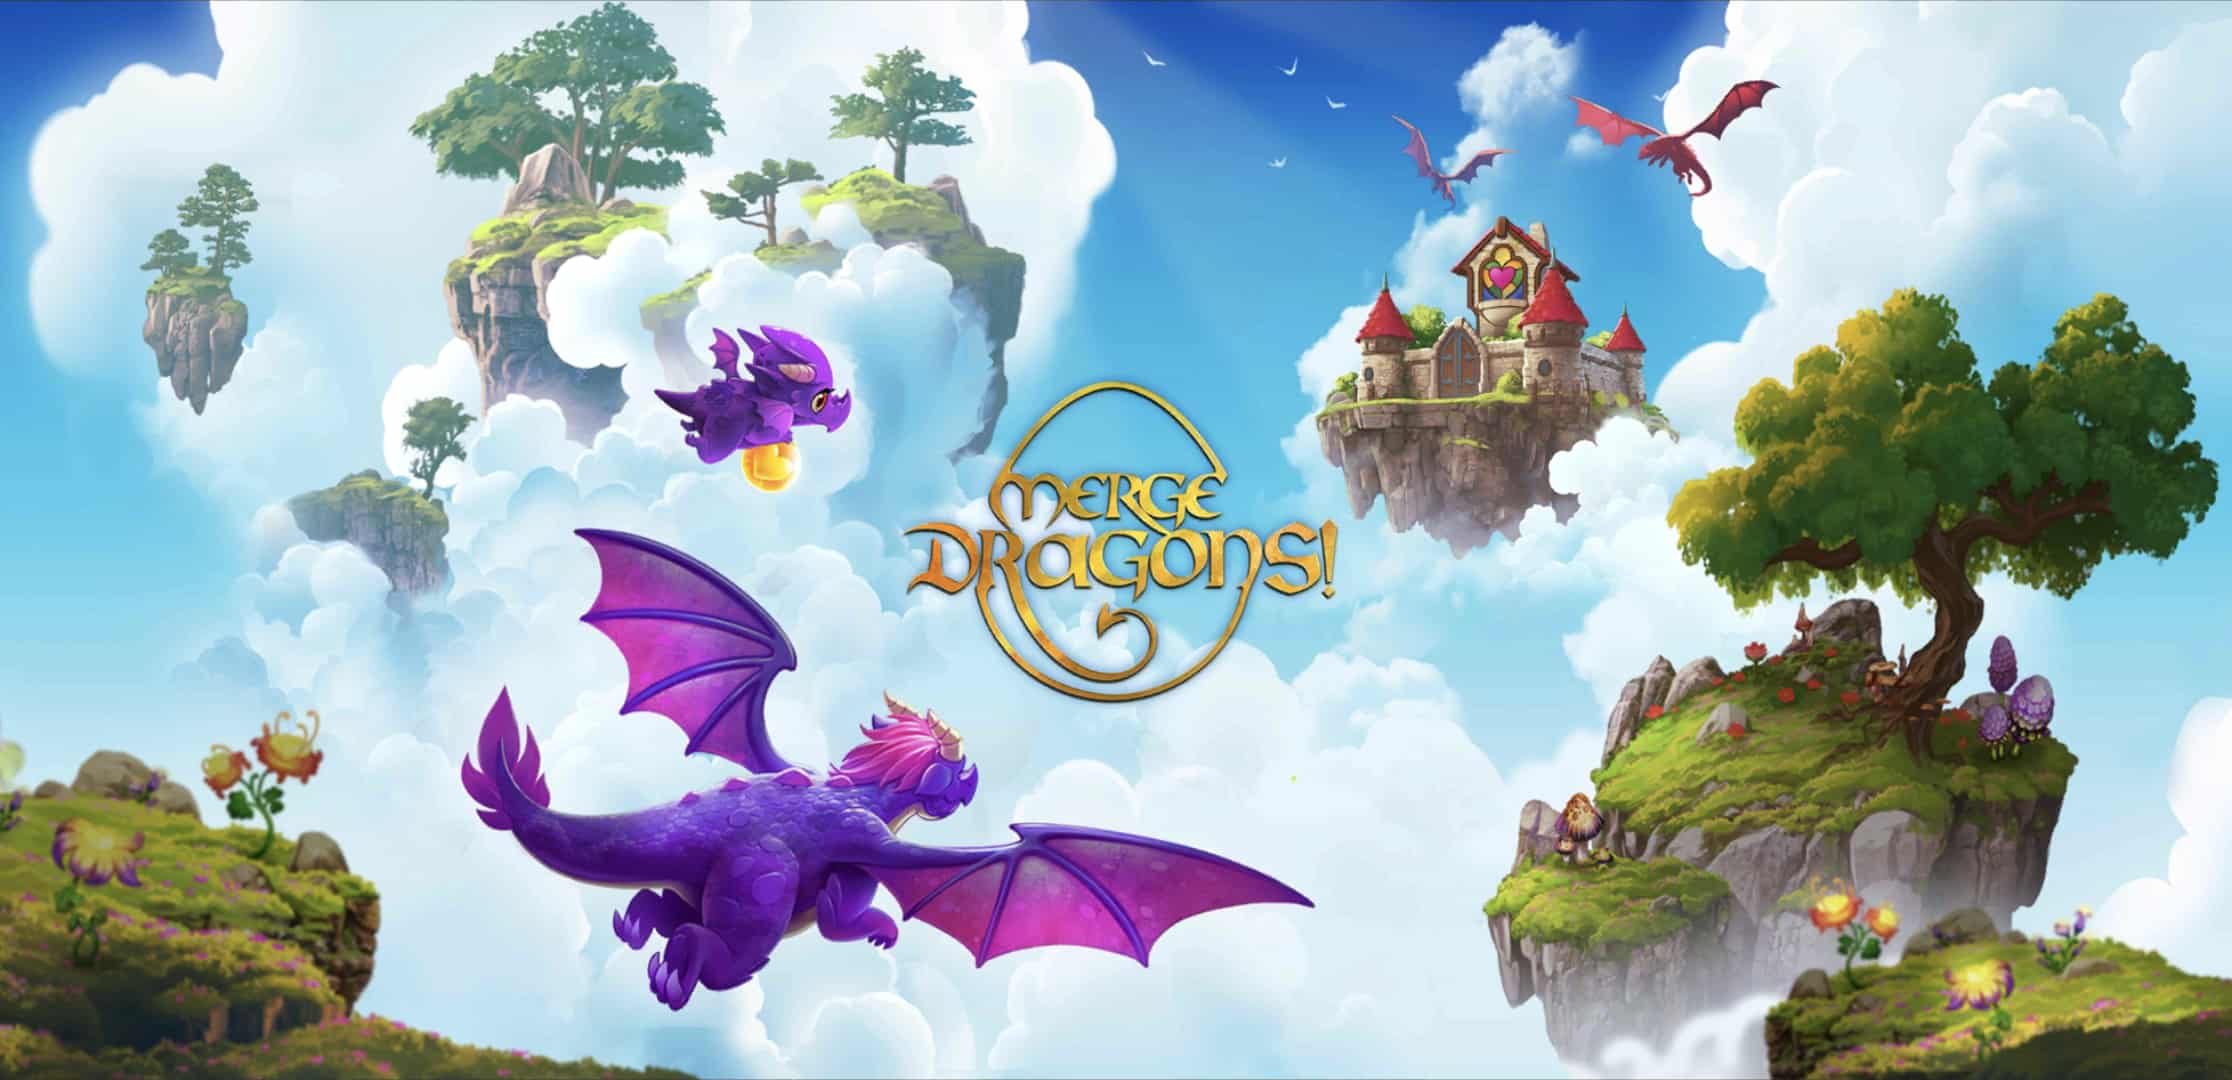 An in-game screenshot from Merge Dragons!